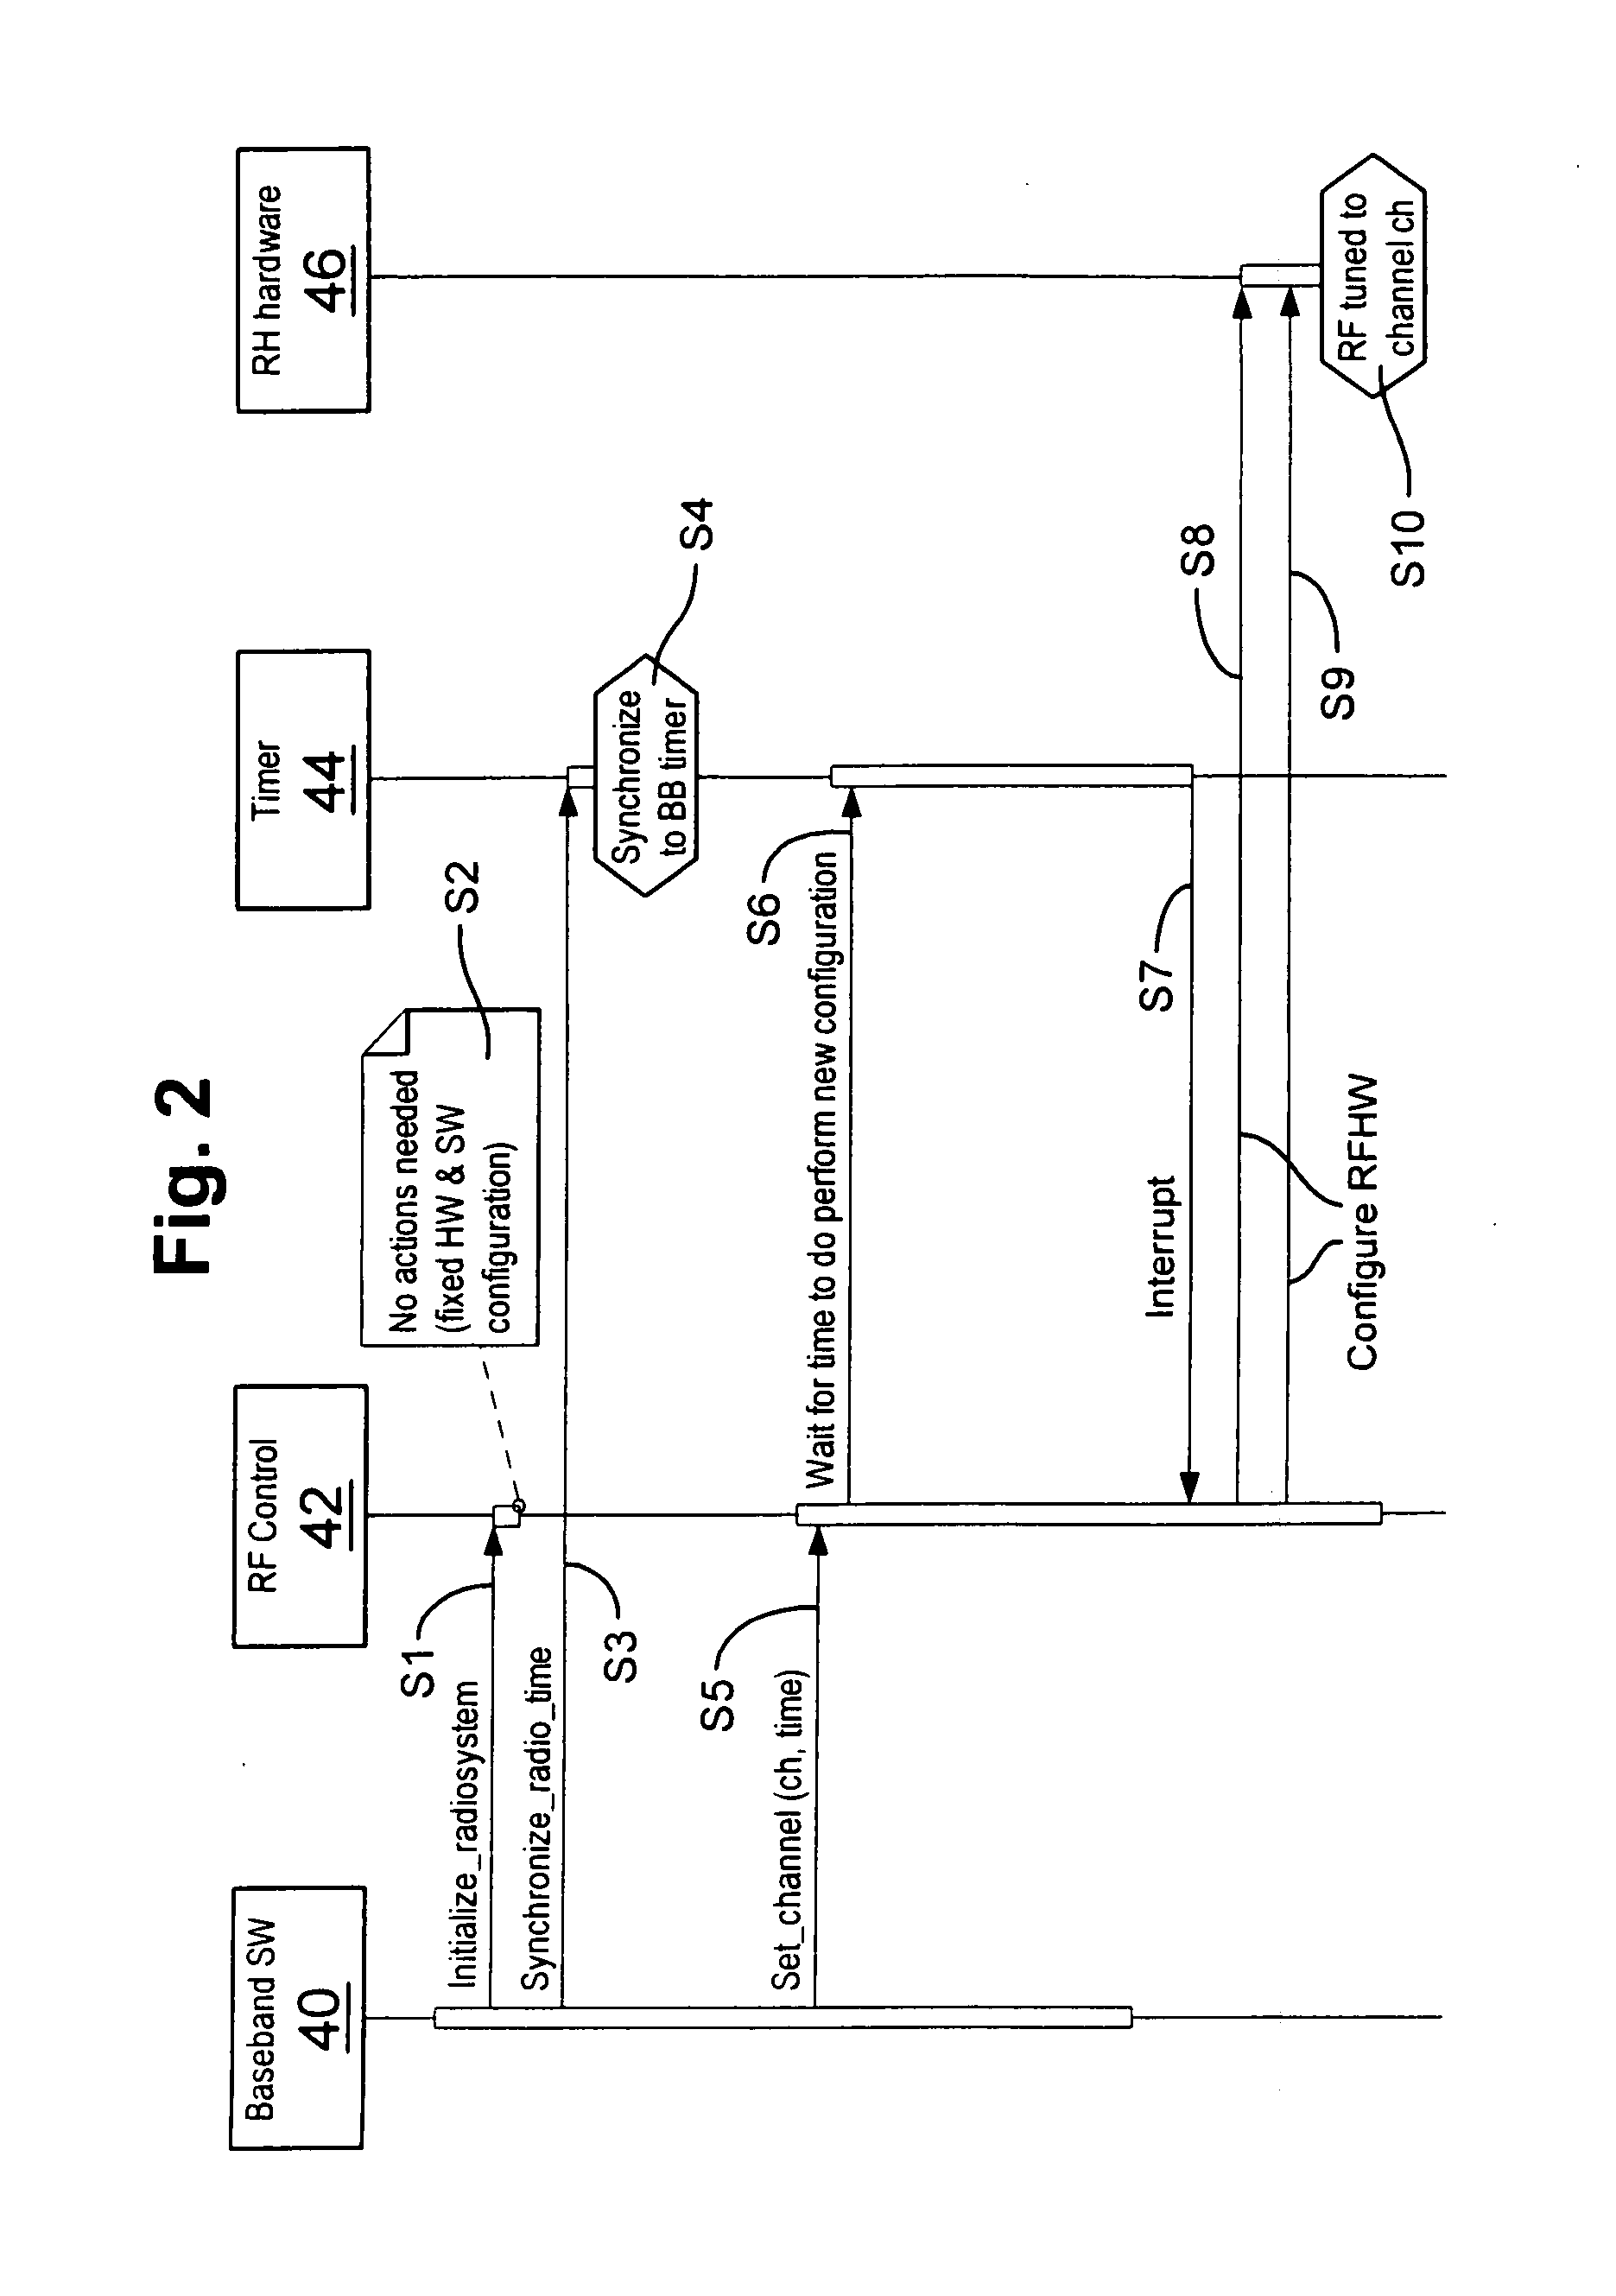 Radio frequency apparatus